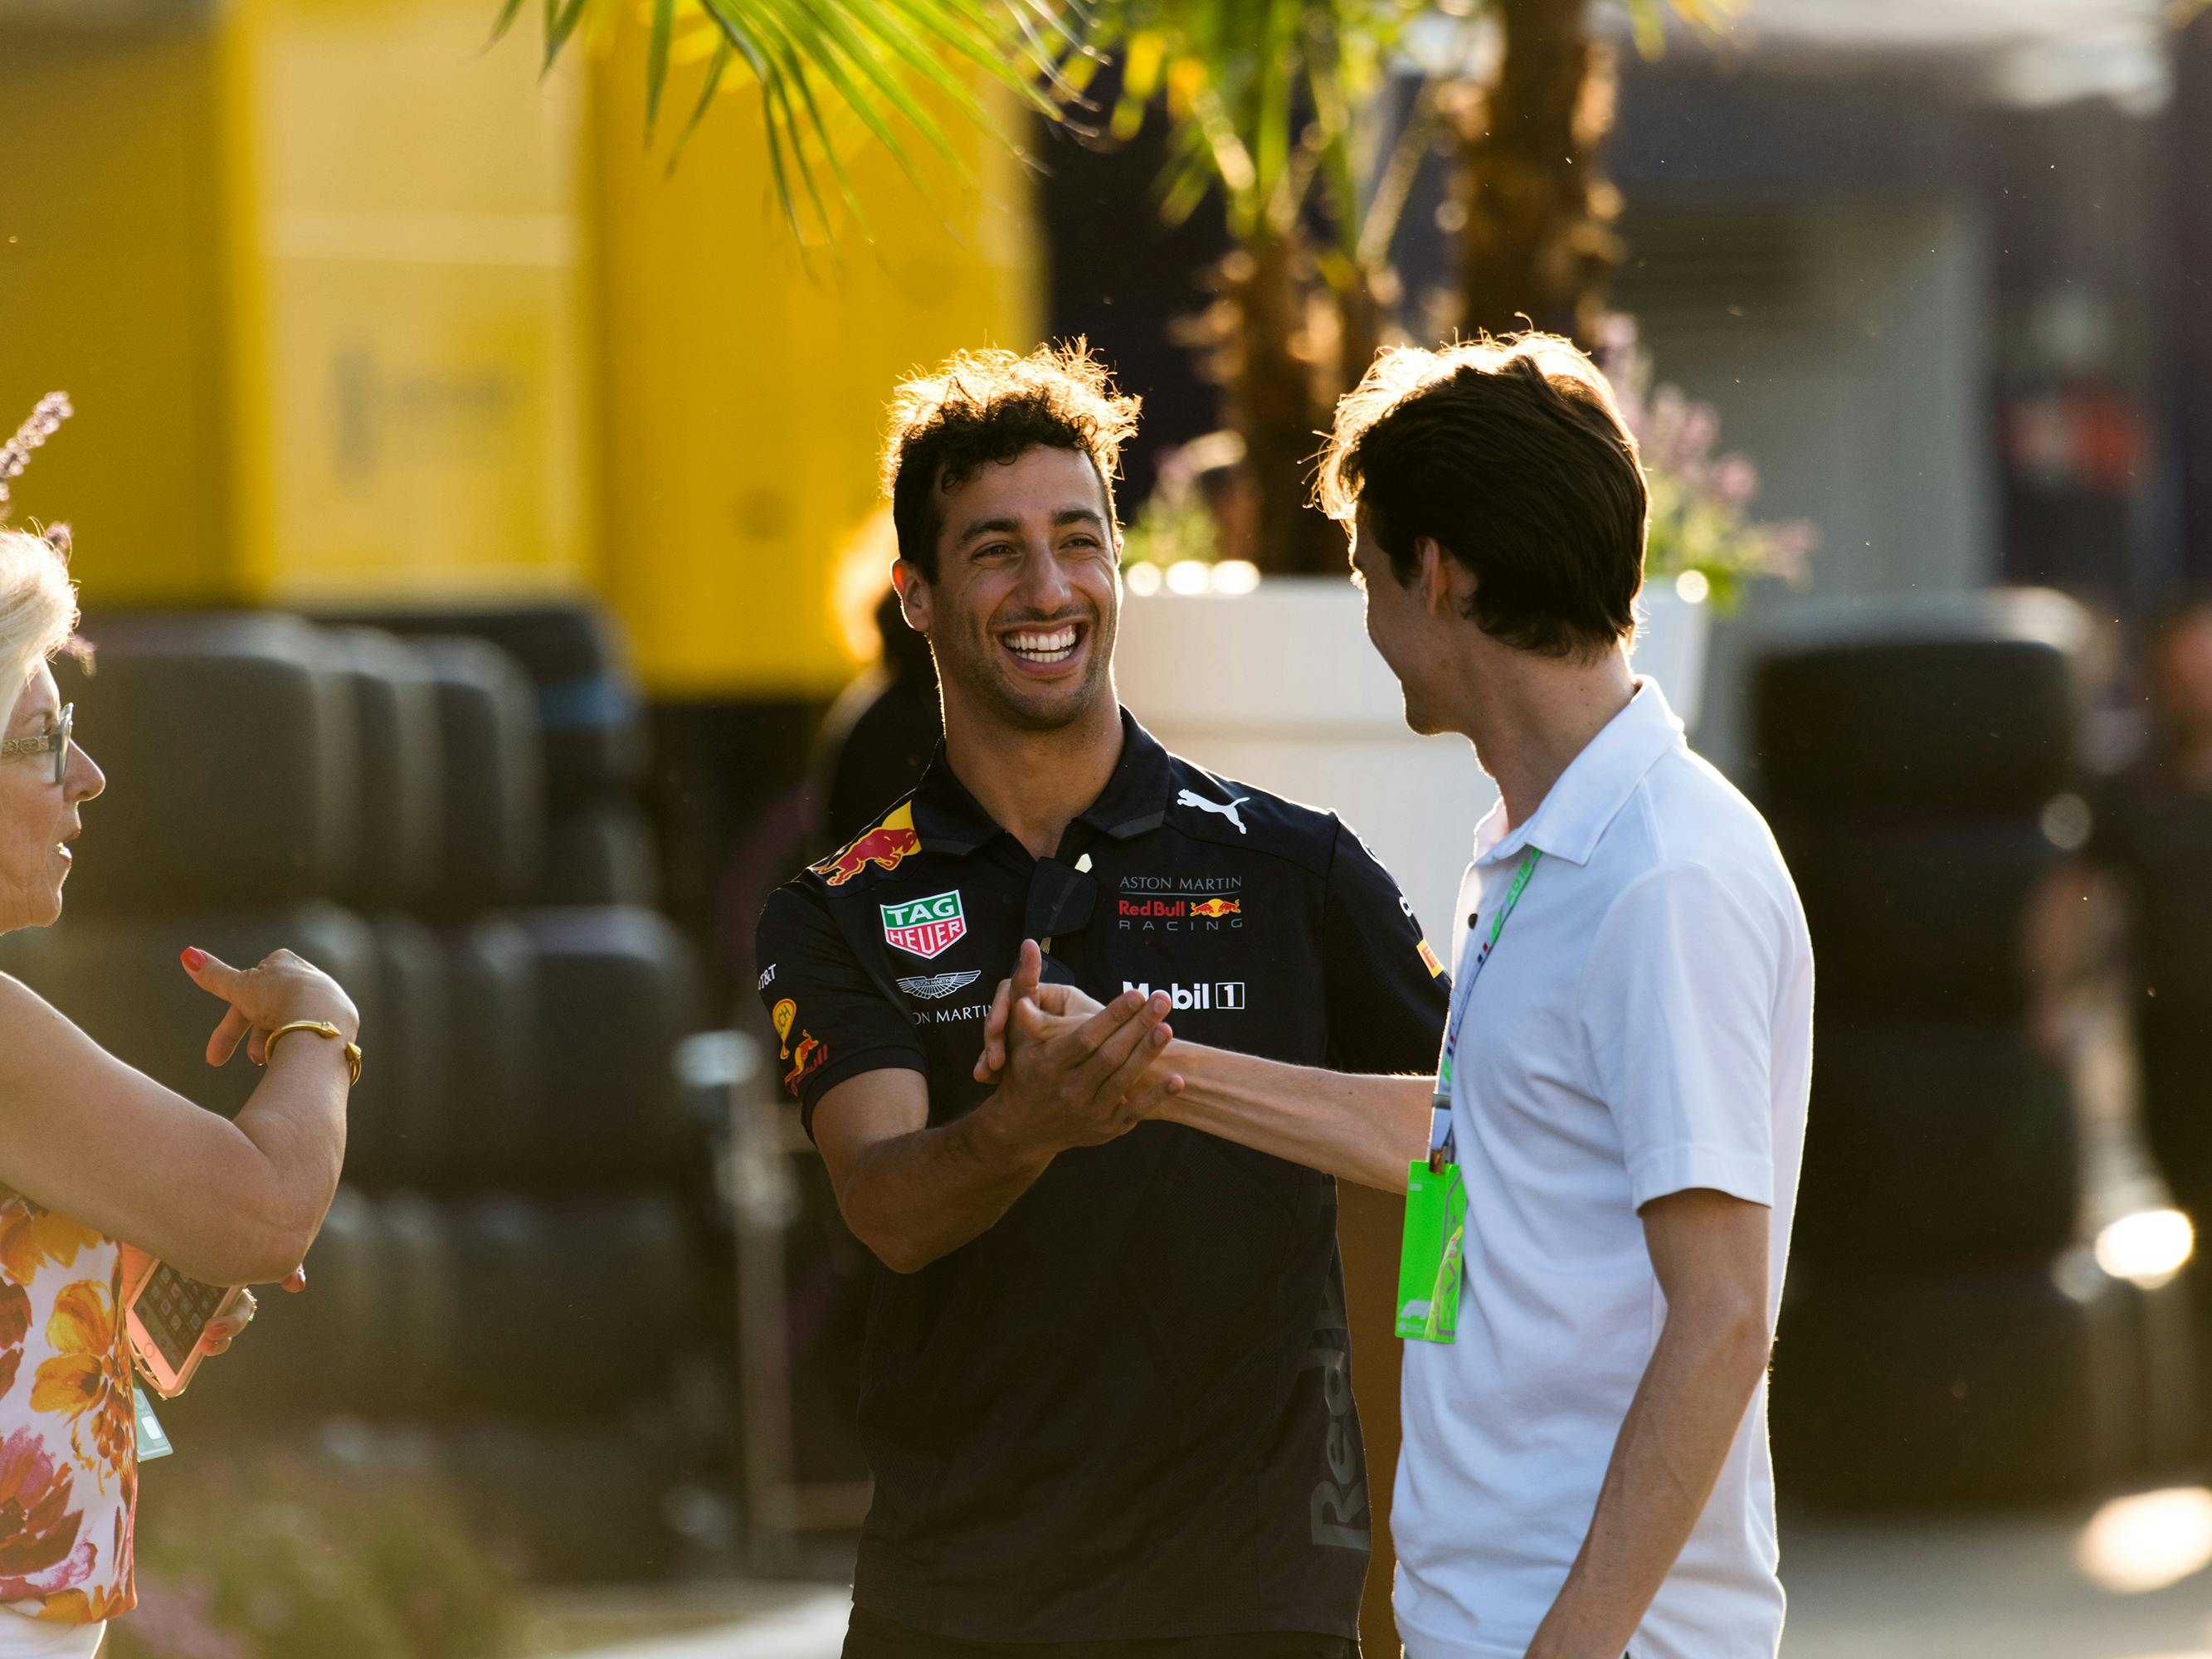 Driver Daniel Ricciardo smiles and shakes hands with a fan in the paddock.